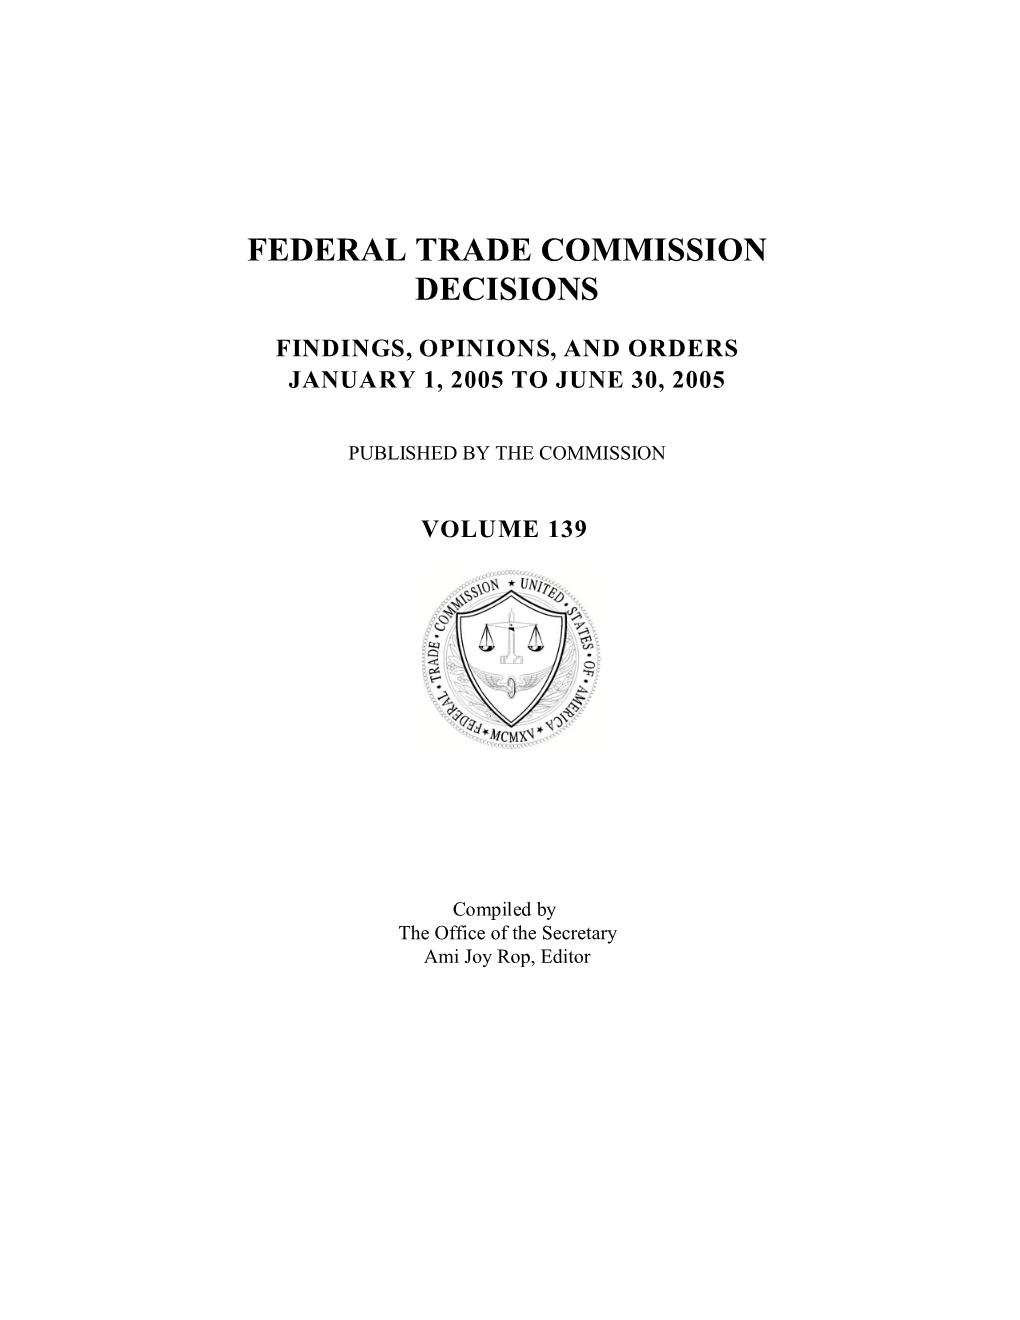 Federal Trade Commission Decisions